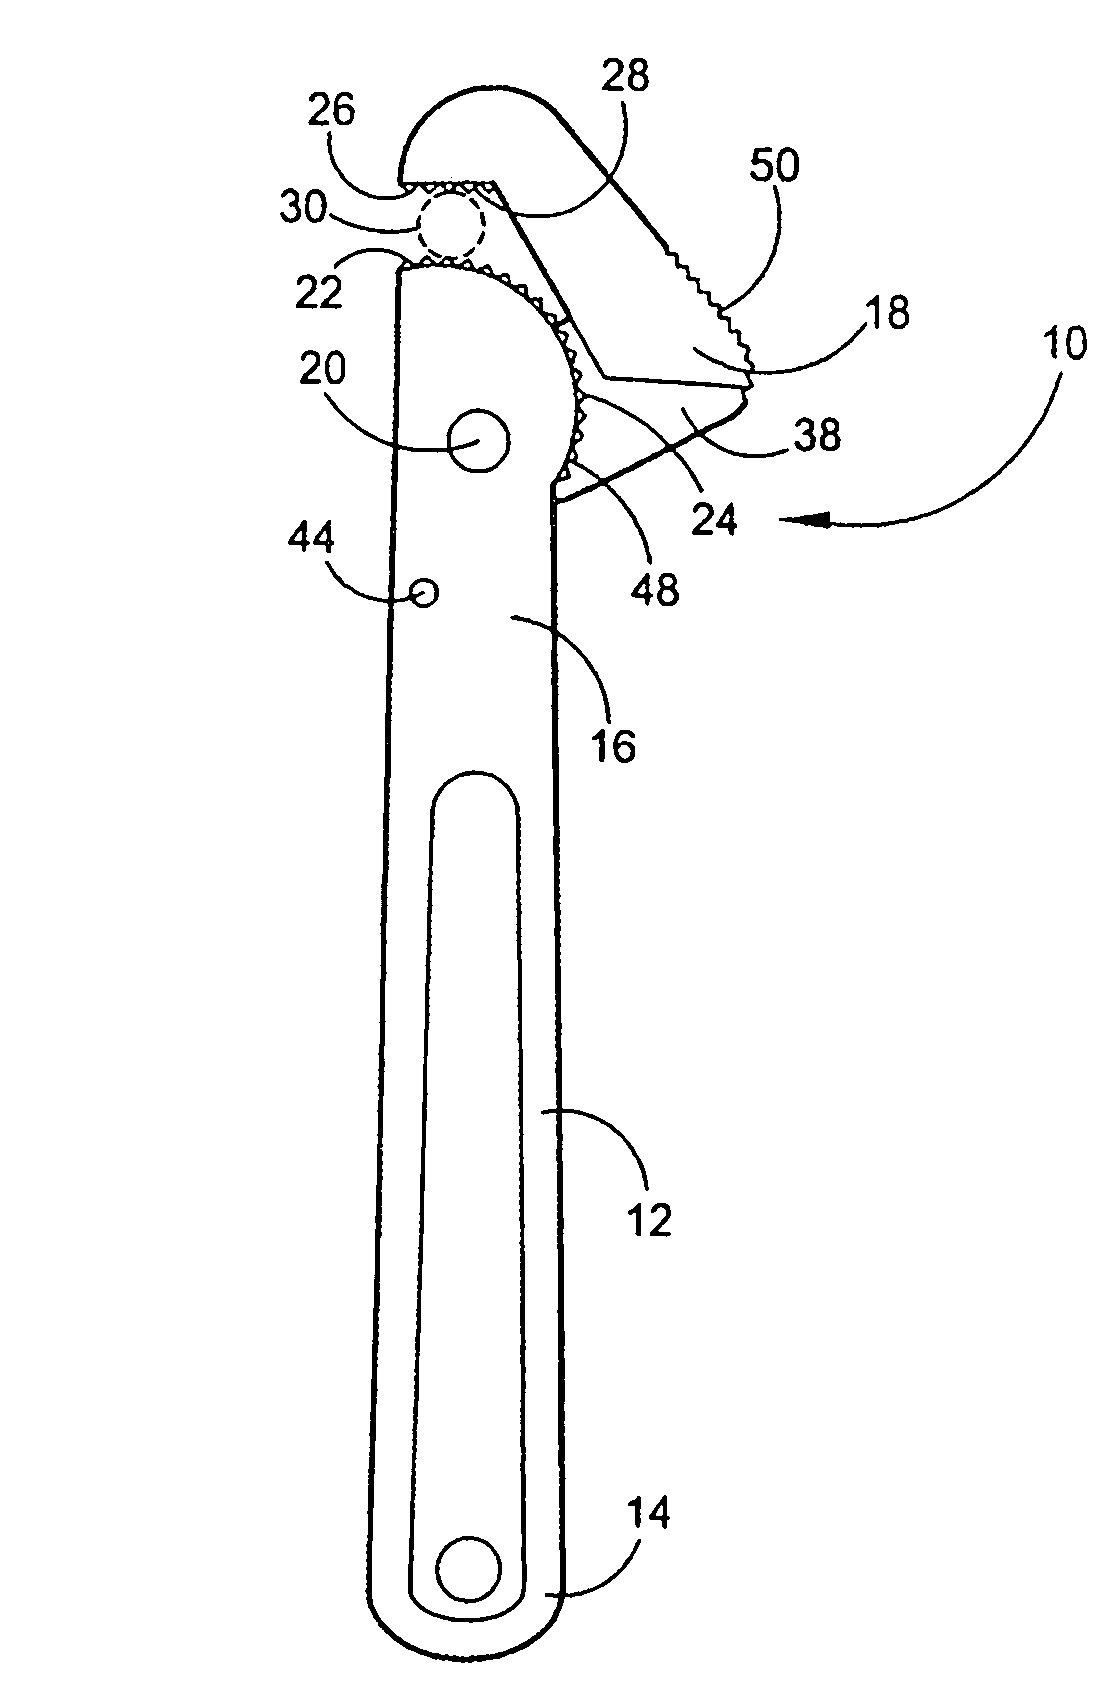 Automatically adjusting self-tightening wrench